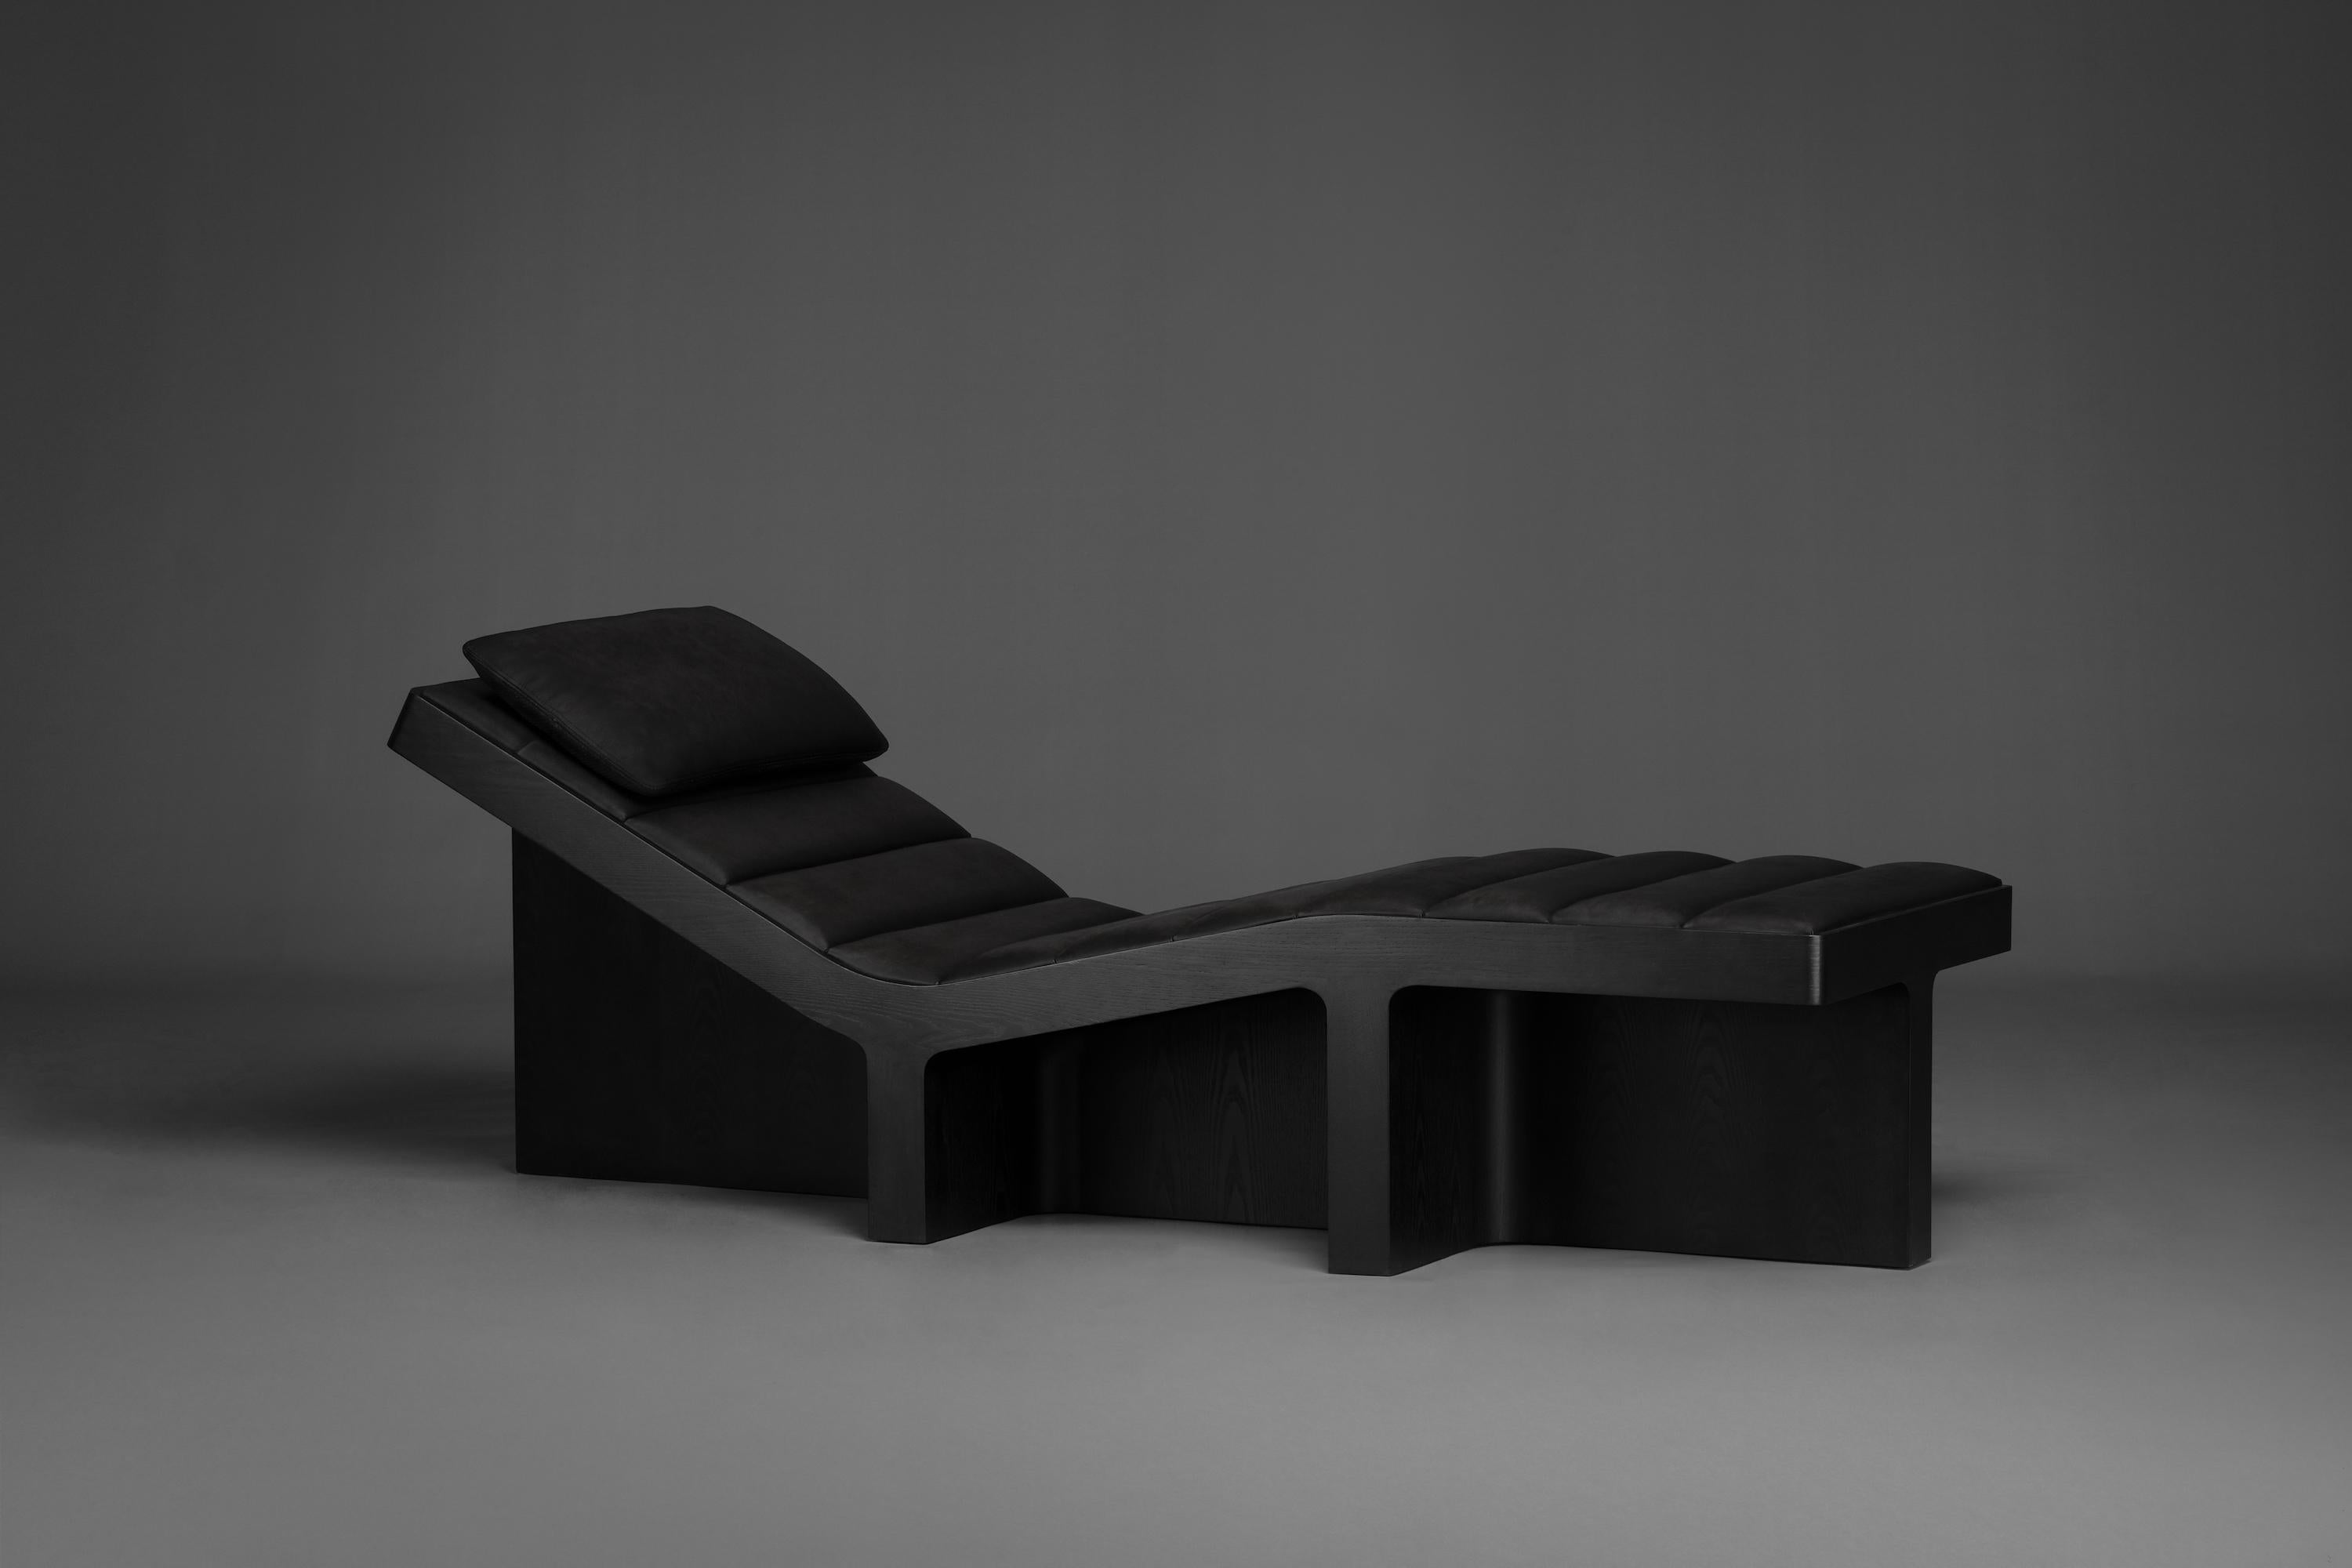 Weight of Shadow Chaise Longue by Atelier V&F
Dimensions: D 70 x W 206 x H 67 cm. Seat Height: 46.5 cm.
Materials: Ash and Nubuck.

Available in black or grey. Please contact us.

The weightiness and the fine curves of the blocks which are